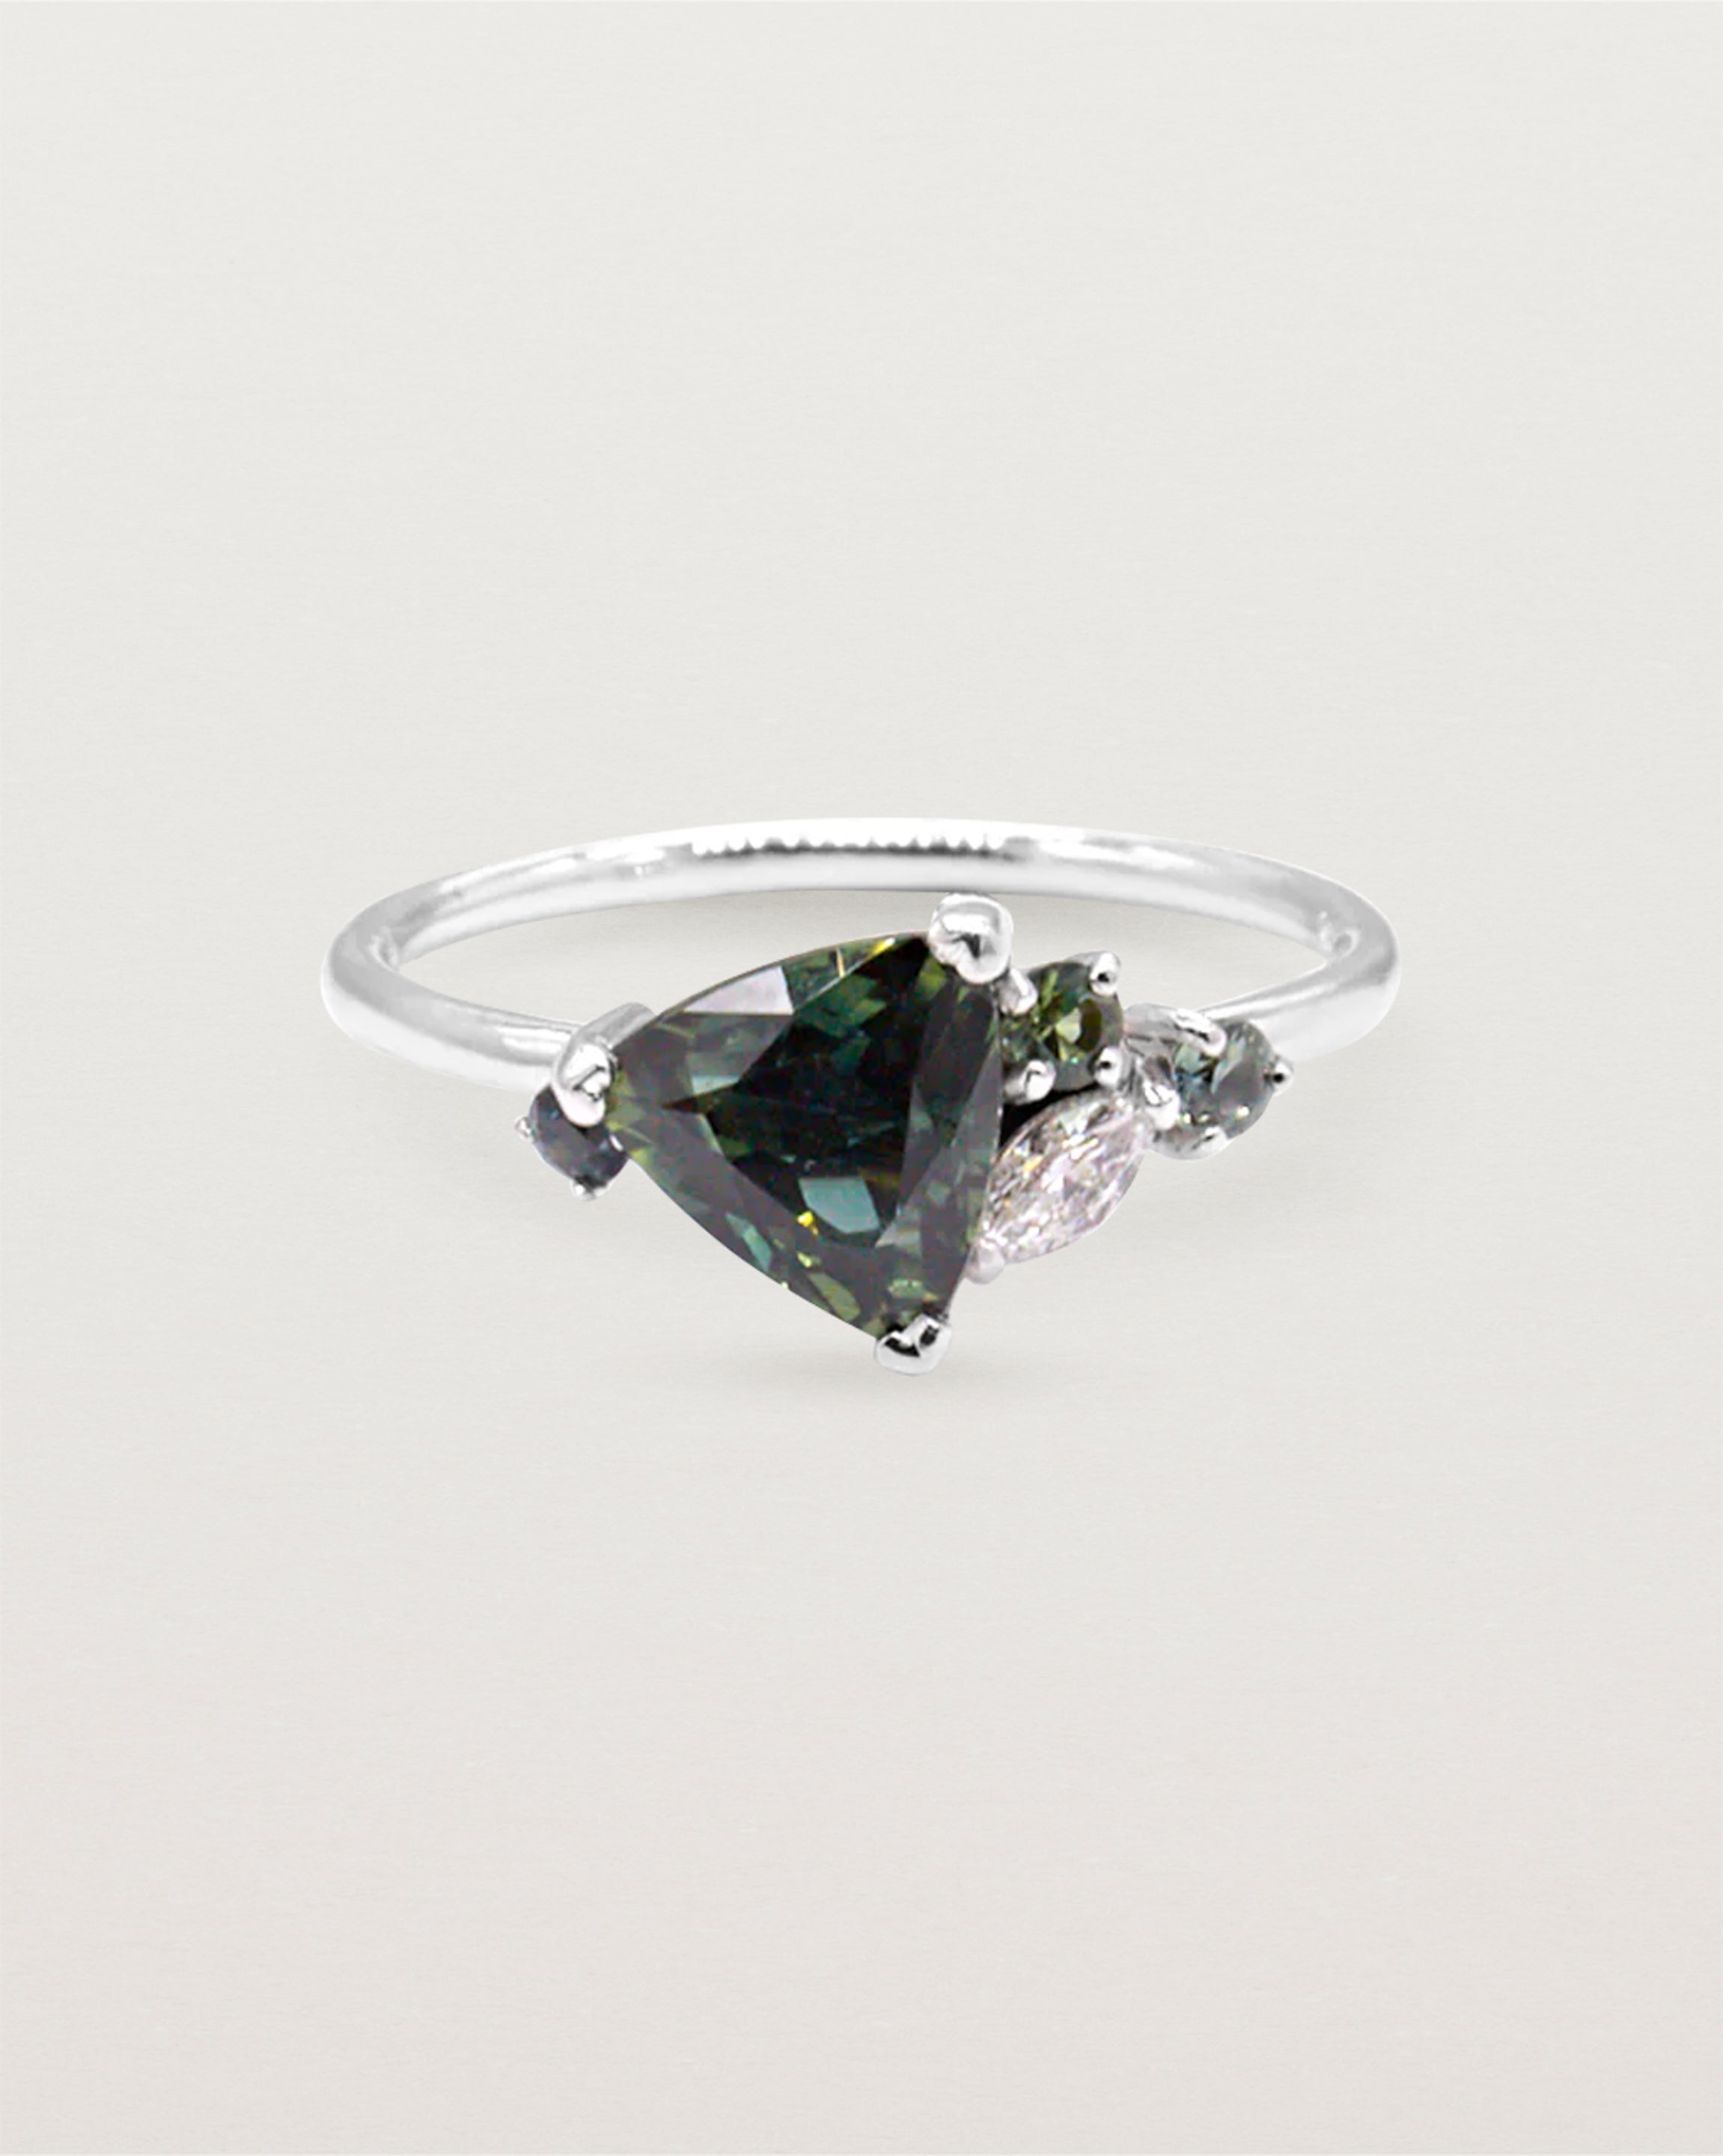 A distinctive cluster, featuring an iridescent trillion cut sapphire and crafted in white gold